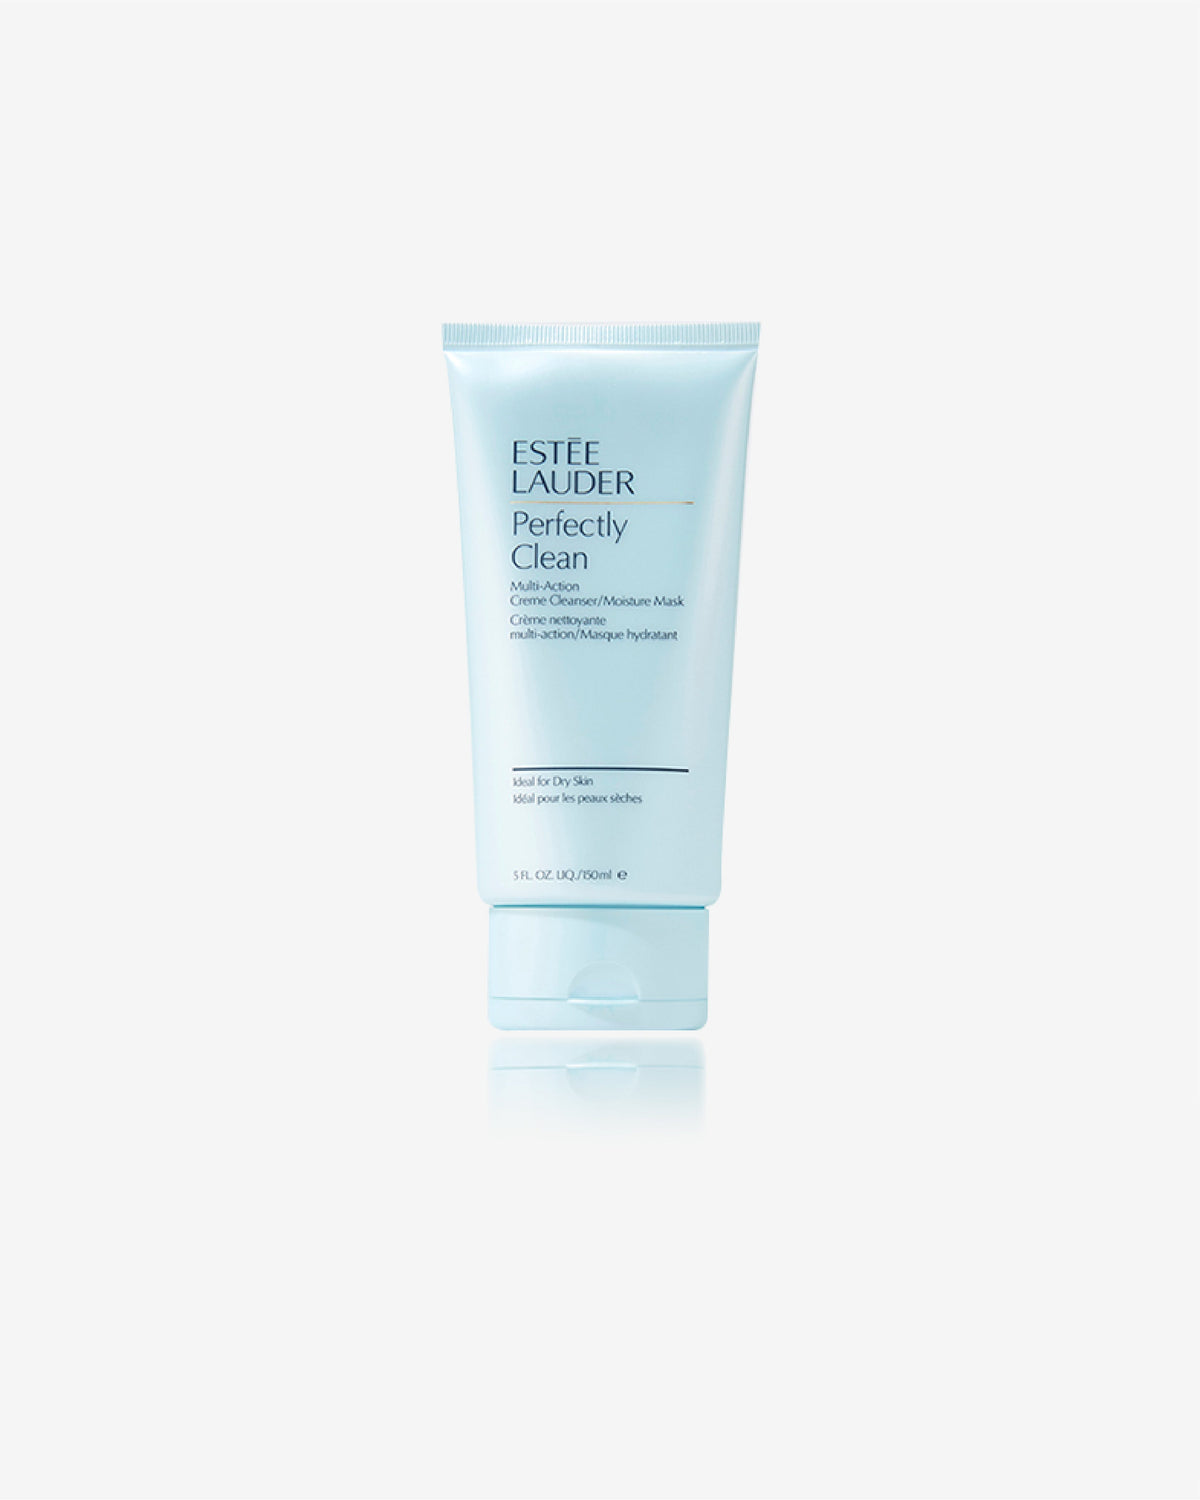 Perfectly Clean Cream Cleanser/Mask